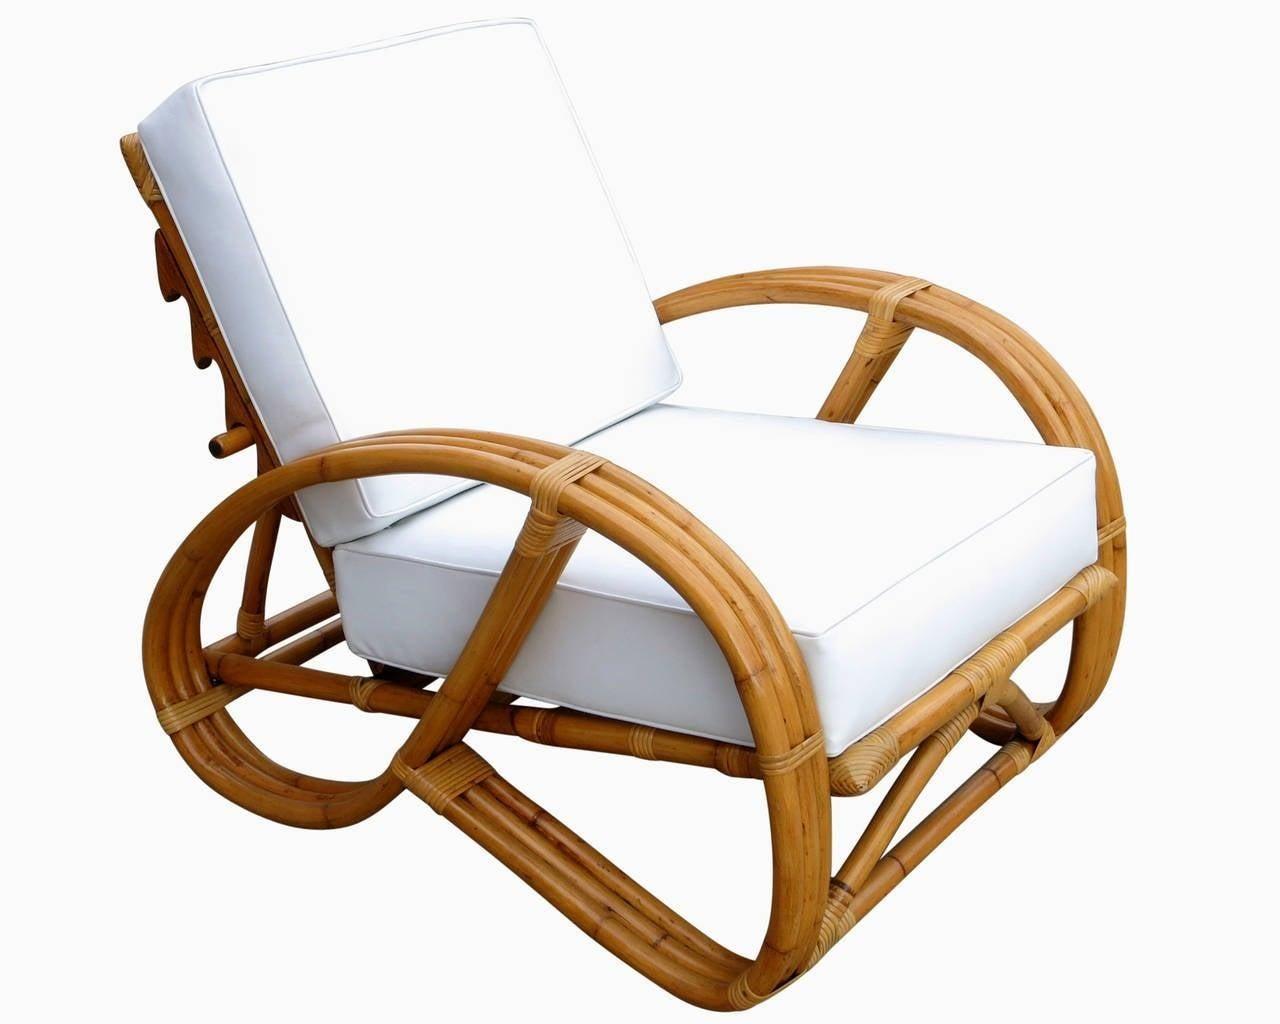 This rare rattan reclining lounge chair with 3/4 Pretzel arms arch-shaped base. The accompanying bent rattan ottoman features three-strand U-shaped legs with matching wave detail.
1950, United States
Measurements
Chair: 32